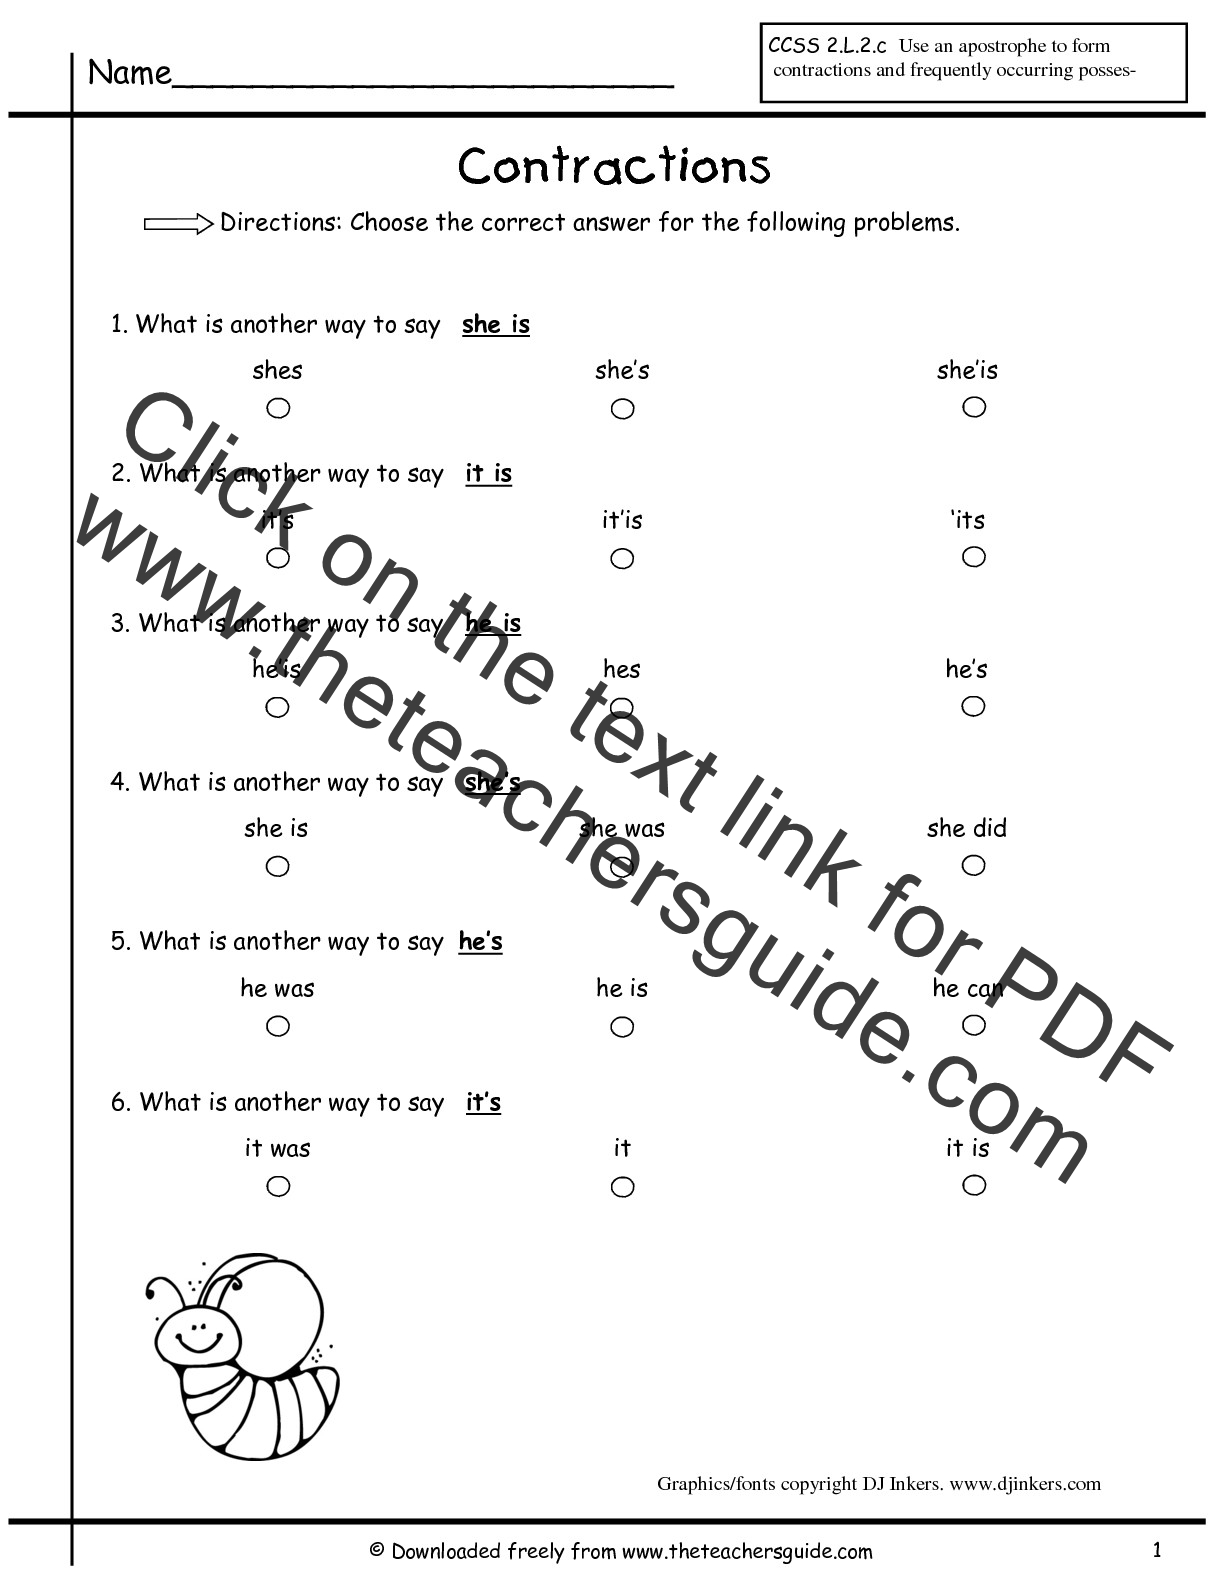 Contractions Worksheet 11rd Grade Pertaining To Contractions Worksheet 3rd Grade